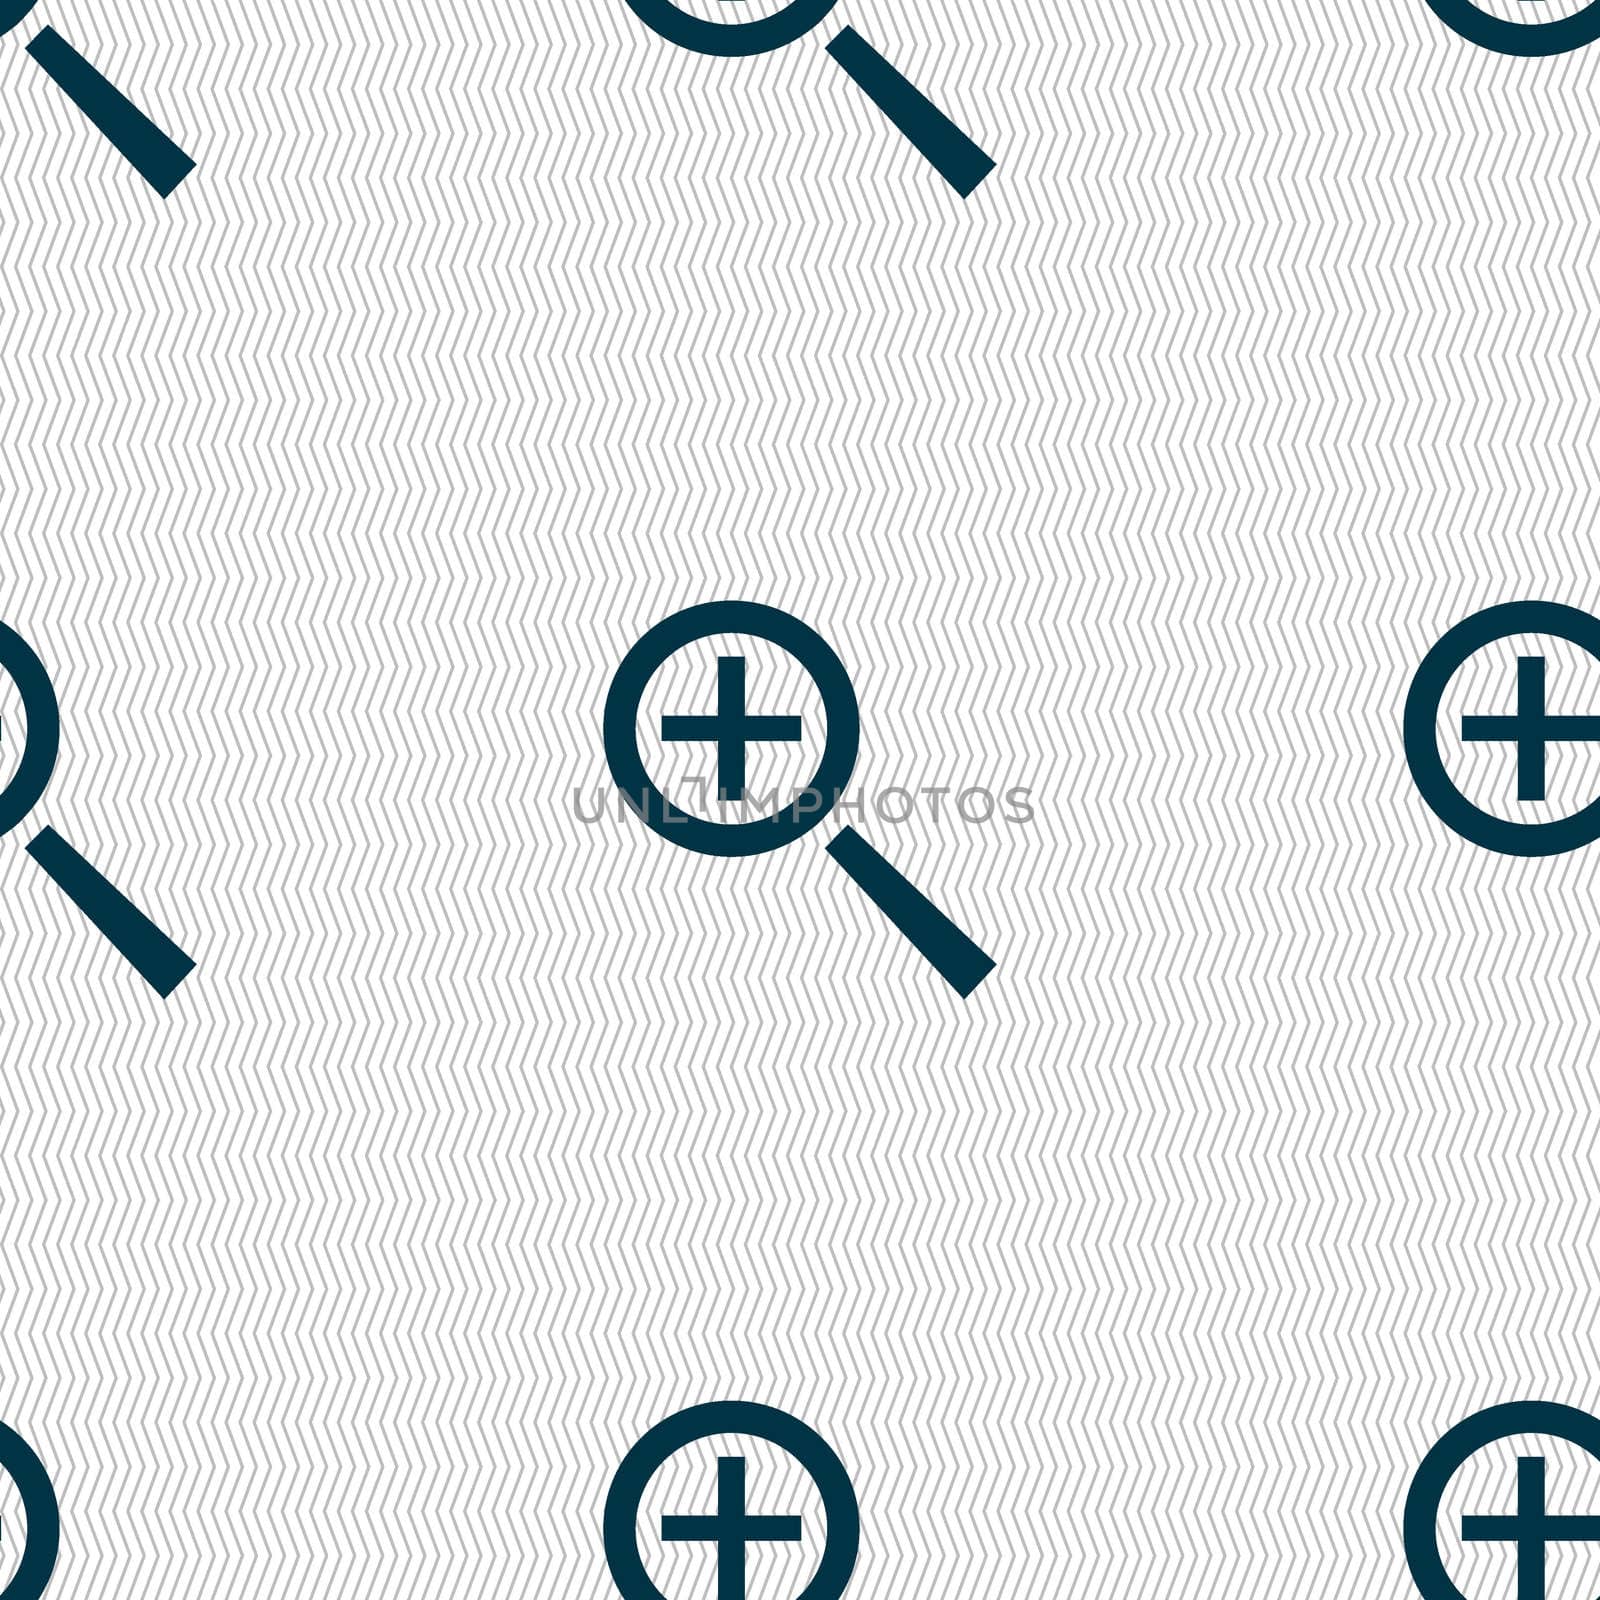 Magnifier glass, Zoom tool icon sign. Seamless abstract background with geometric shapes.  by serhii_lohvyniuk